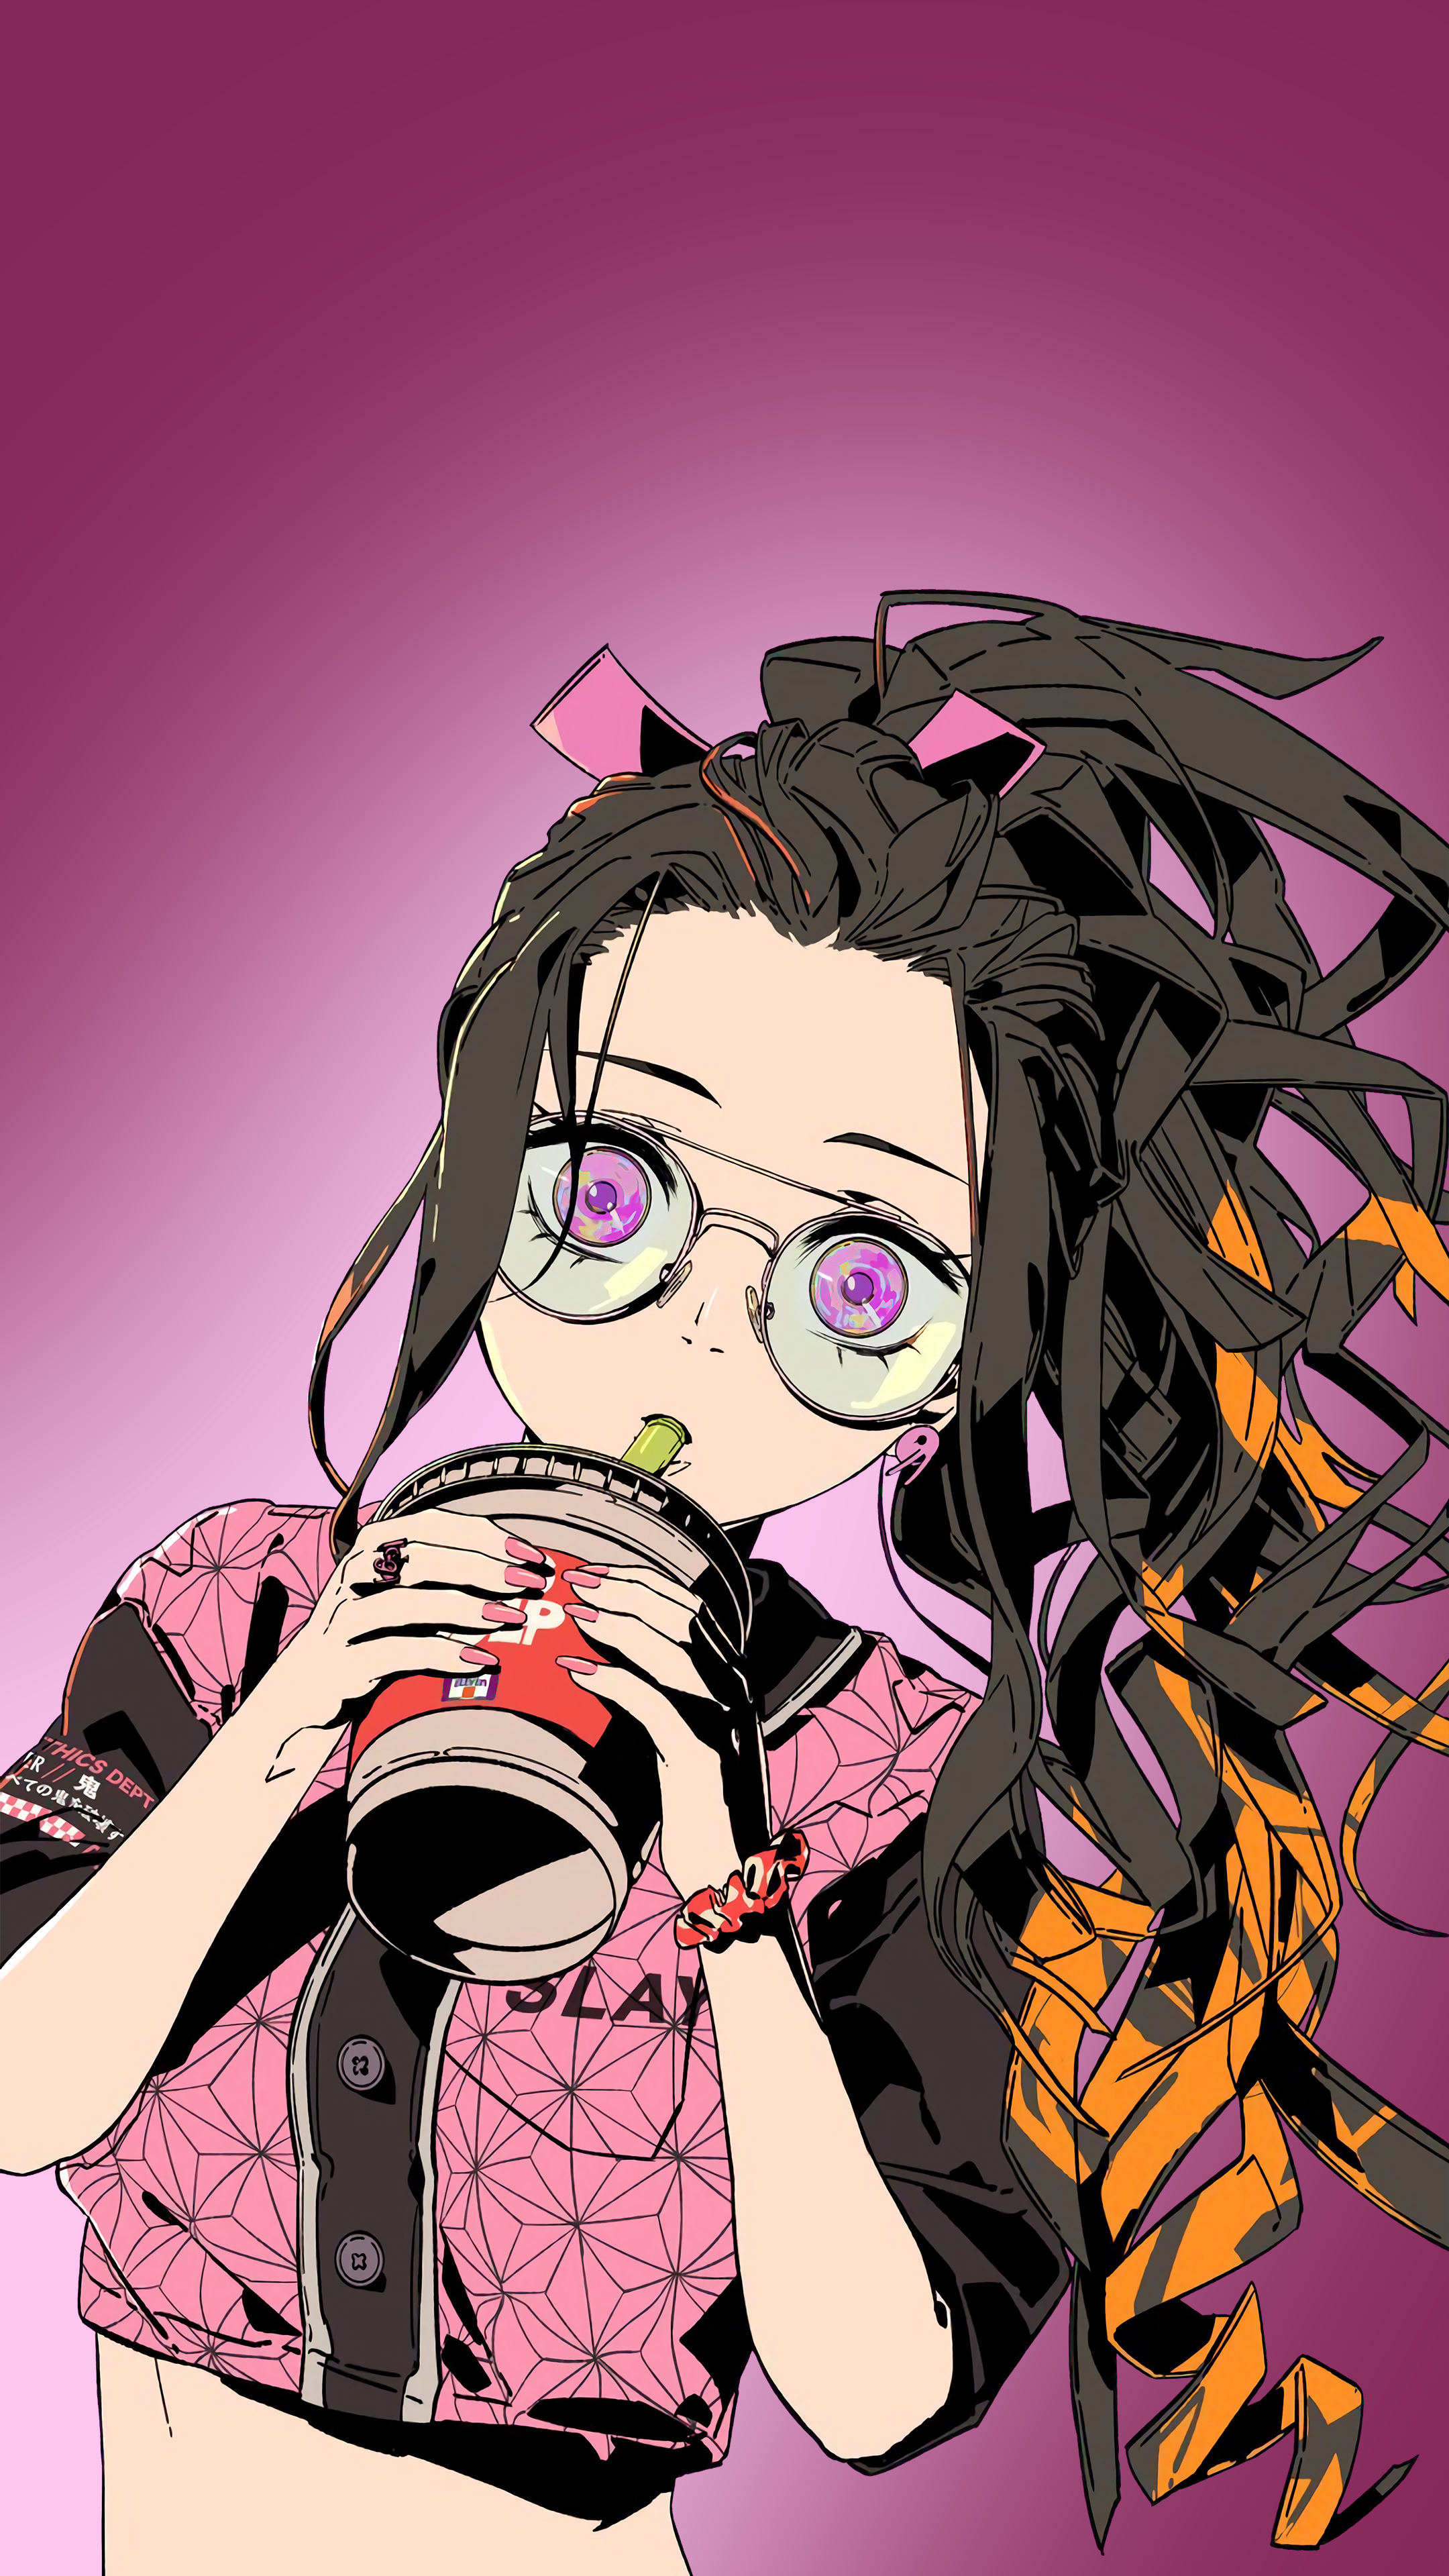 My Photoshopped Versions Of Nezuko Wallpaper Different Backrounds